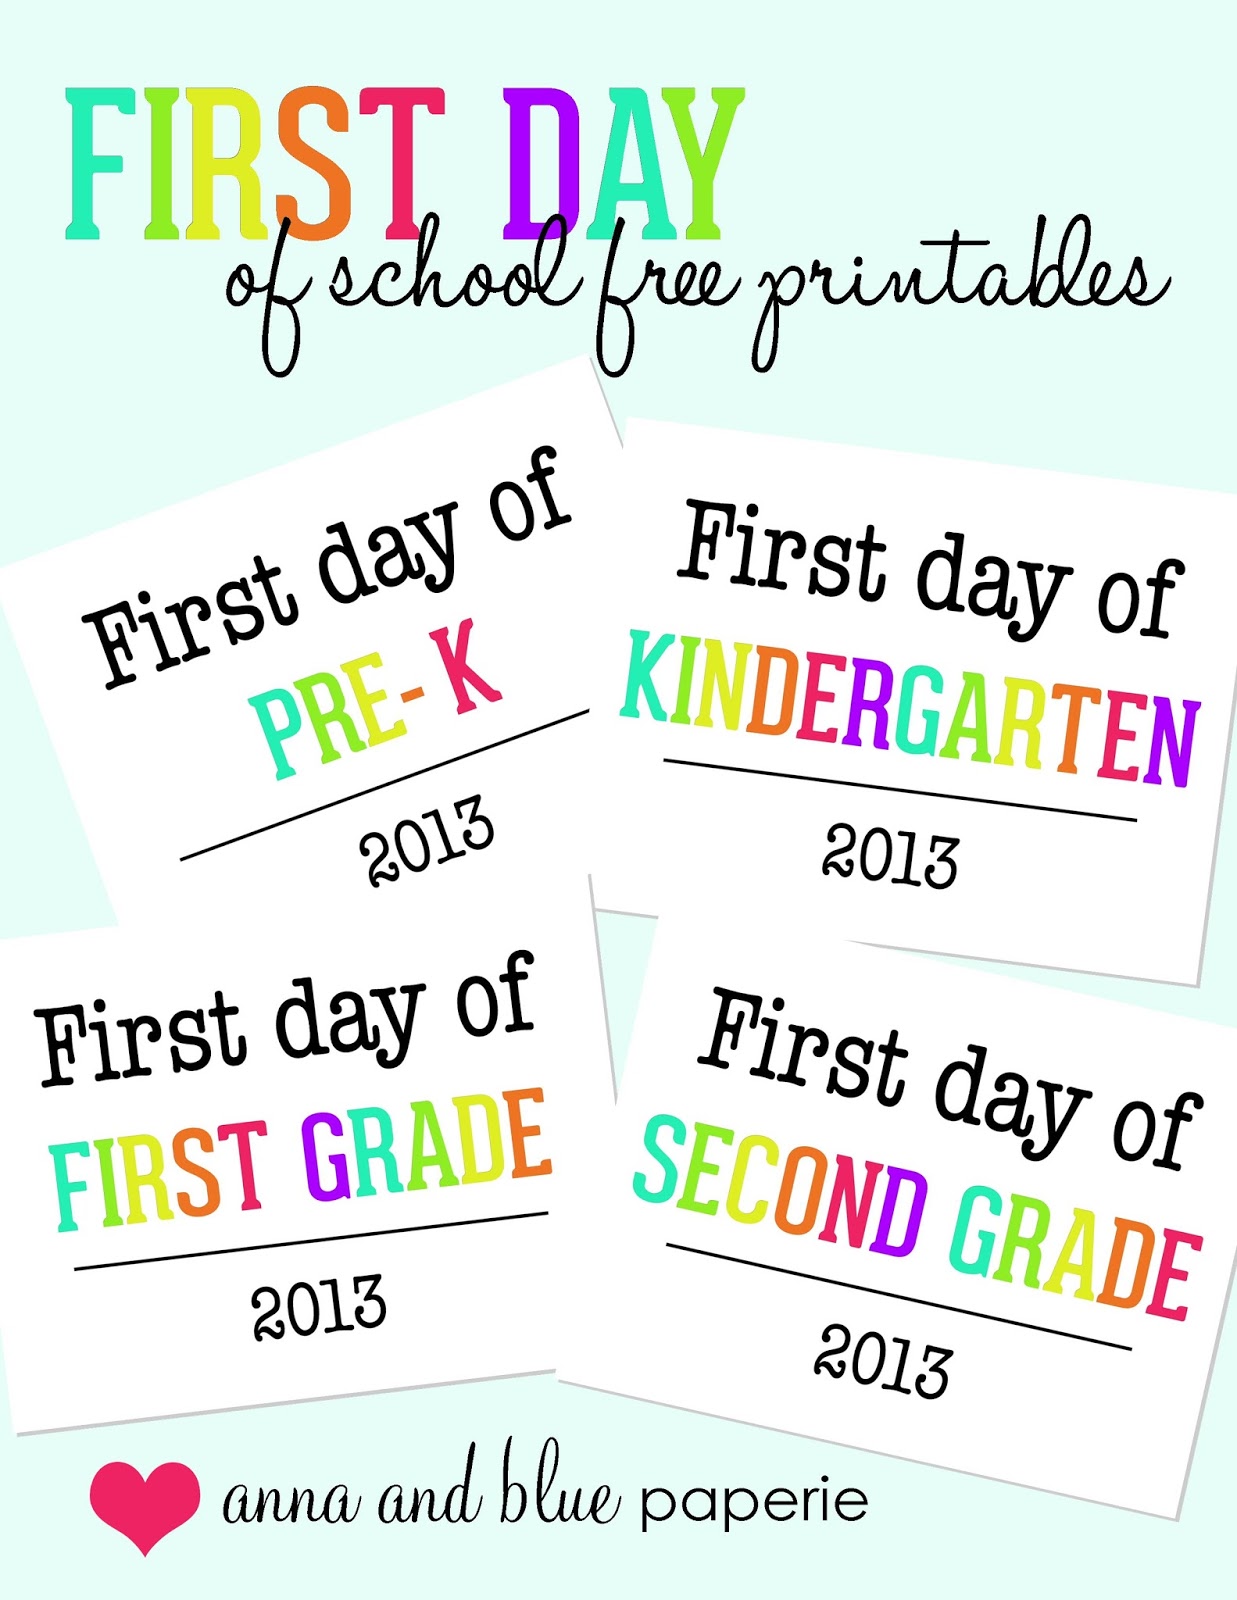 anna-and-blue-paperie-first-day-of-school-photo-op-free-printable